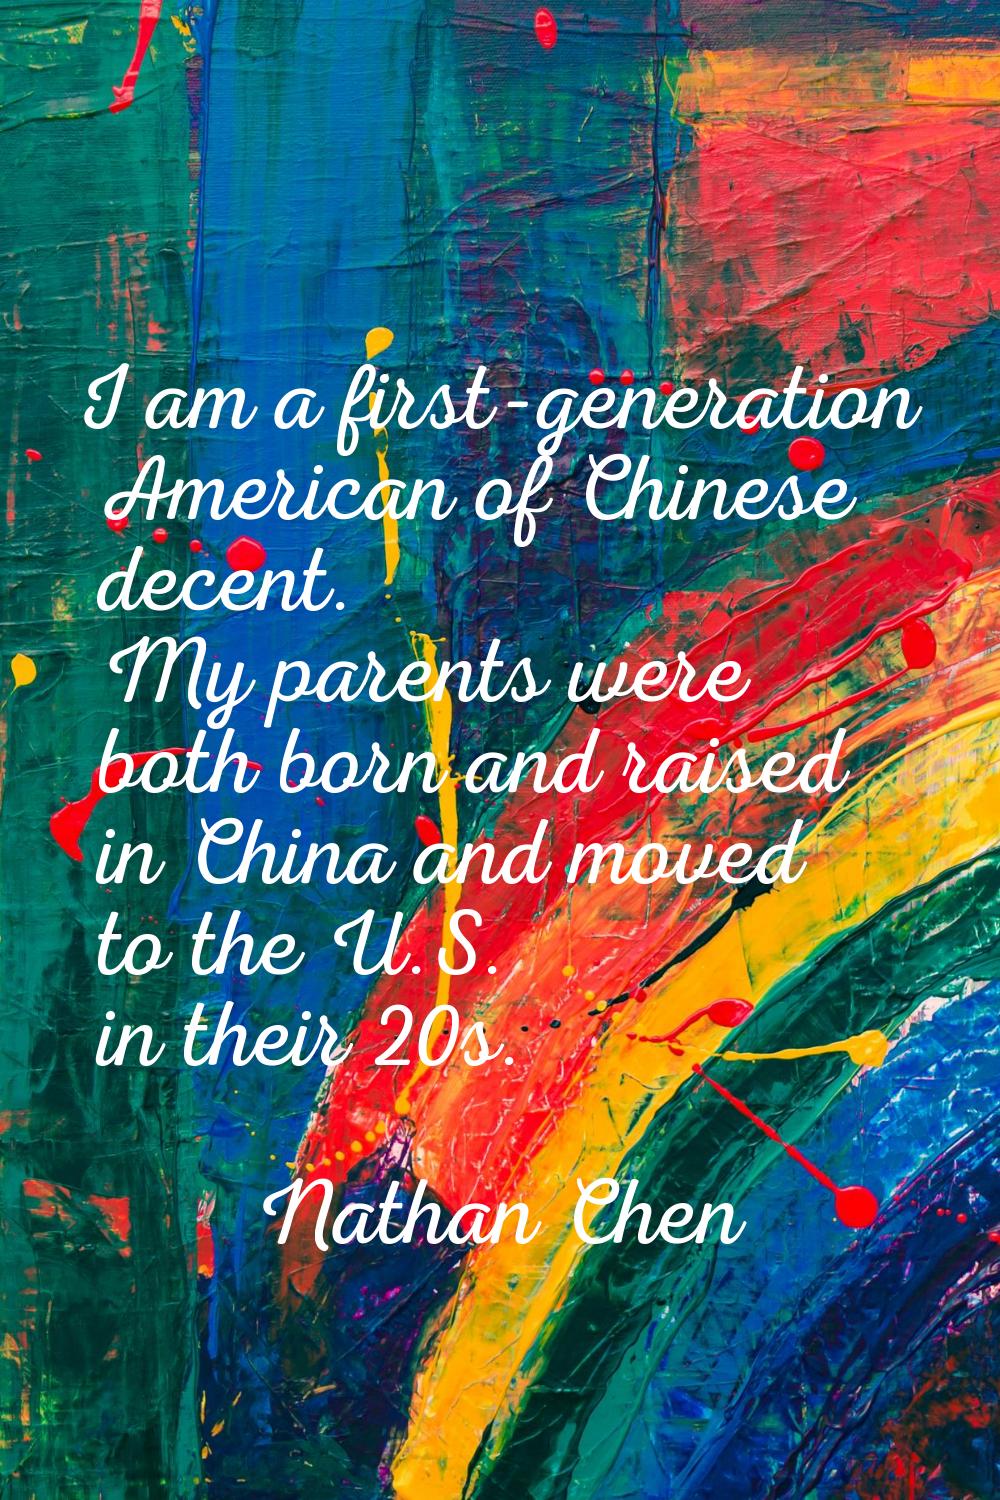 I am a first-generation American of Chinese decent. My parents were both born and raised in China a